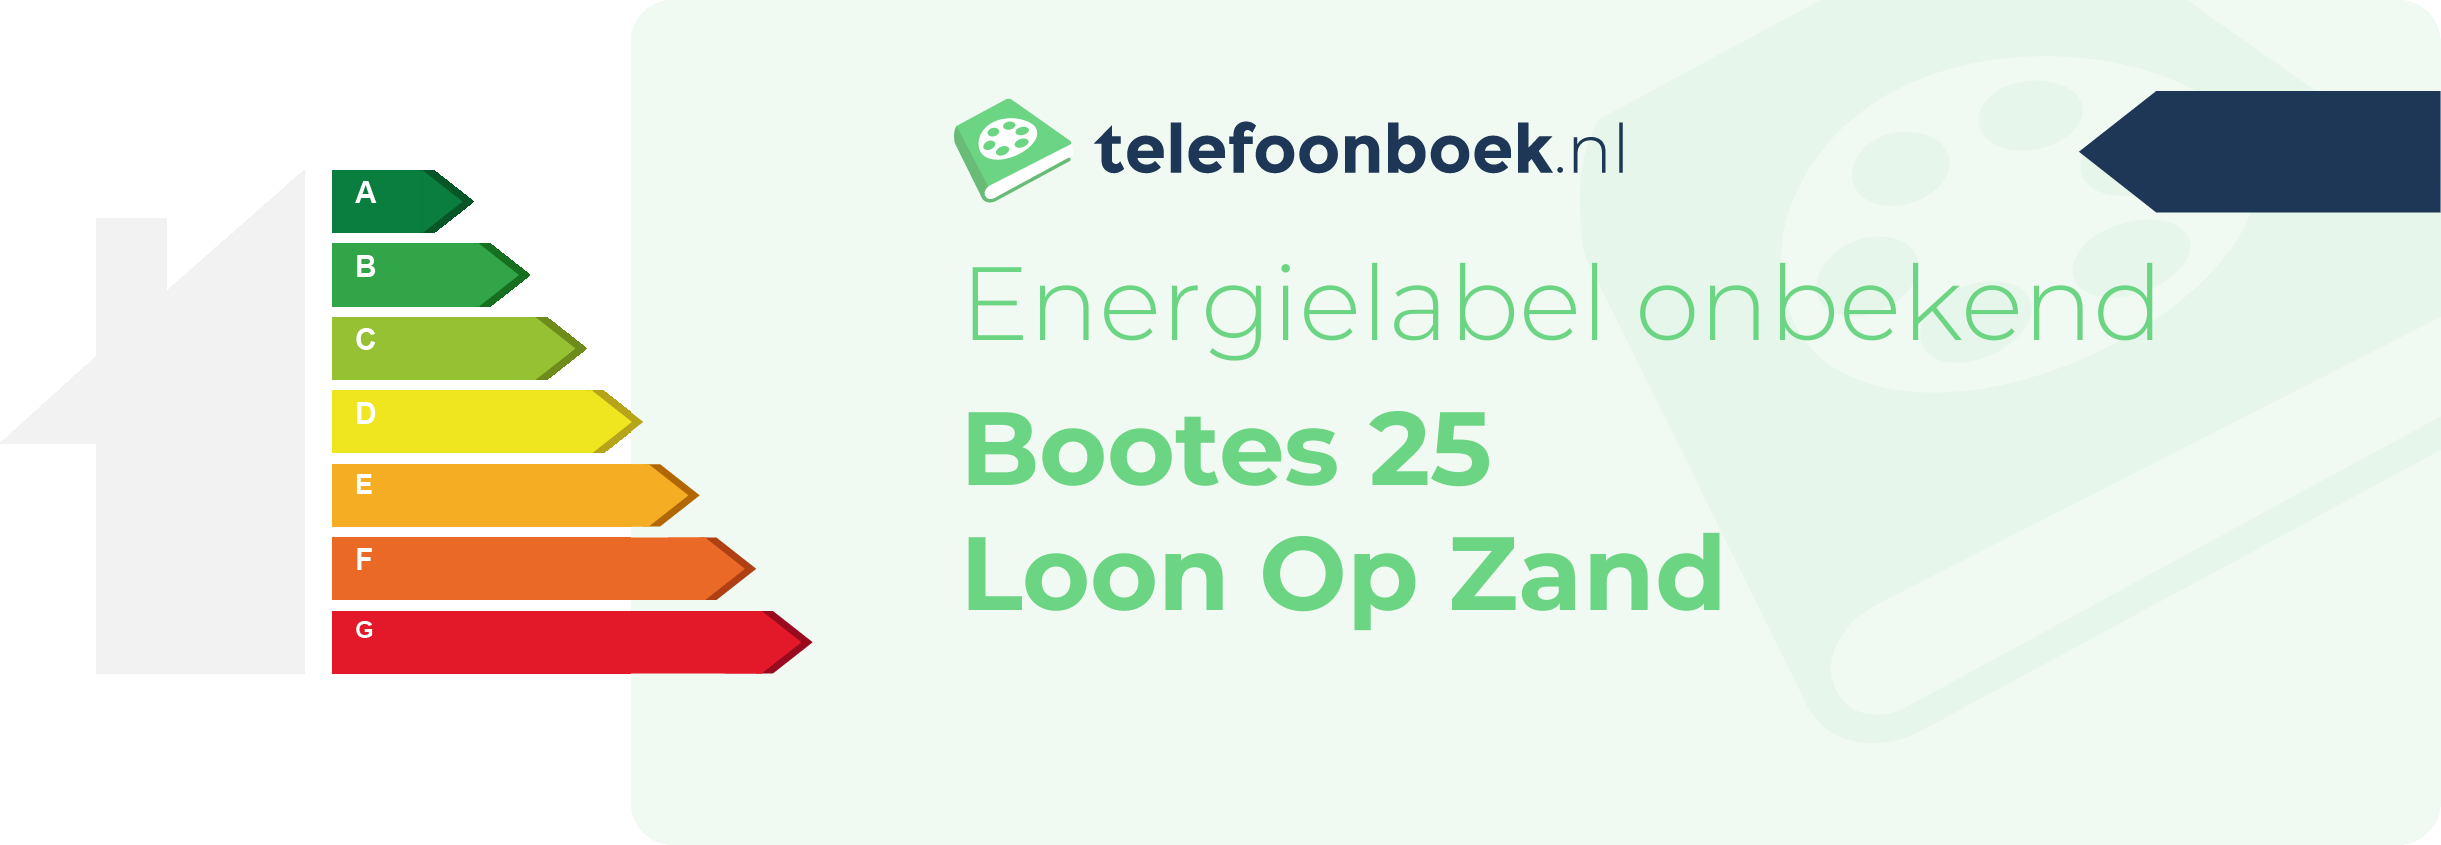 Energielabel Bootes 25 Loon Op Zand